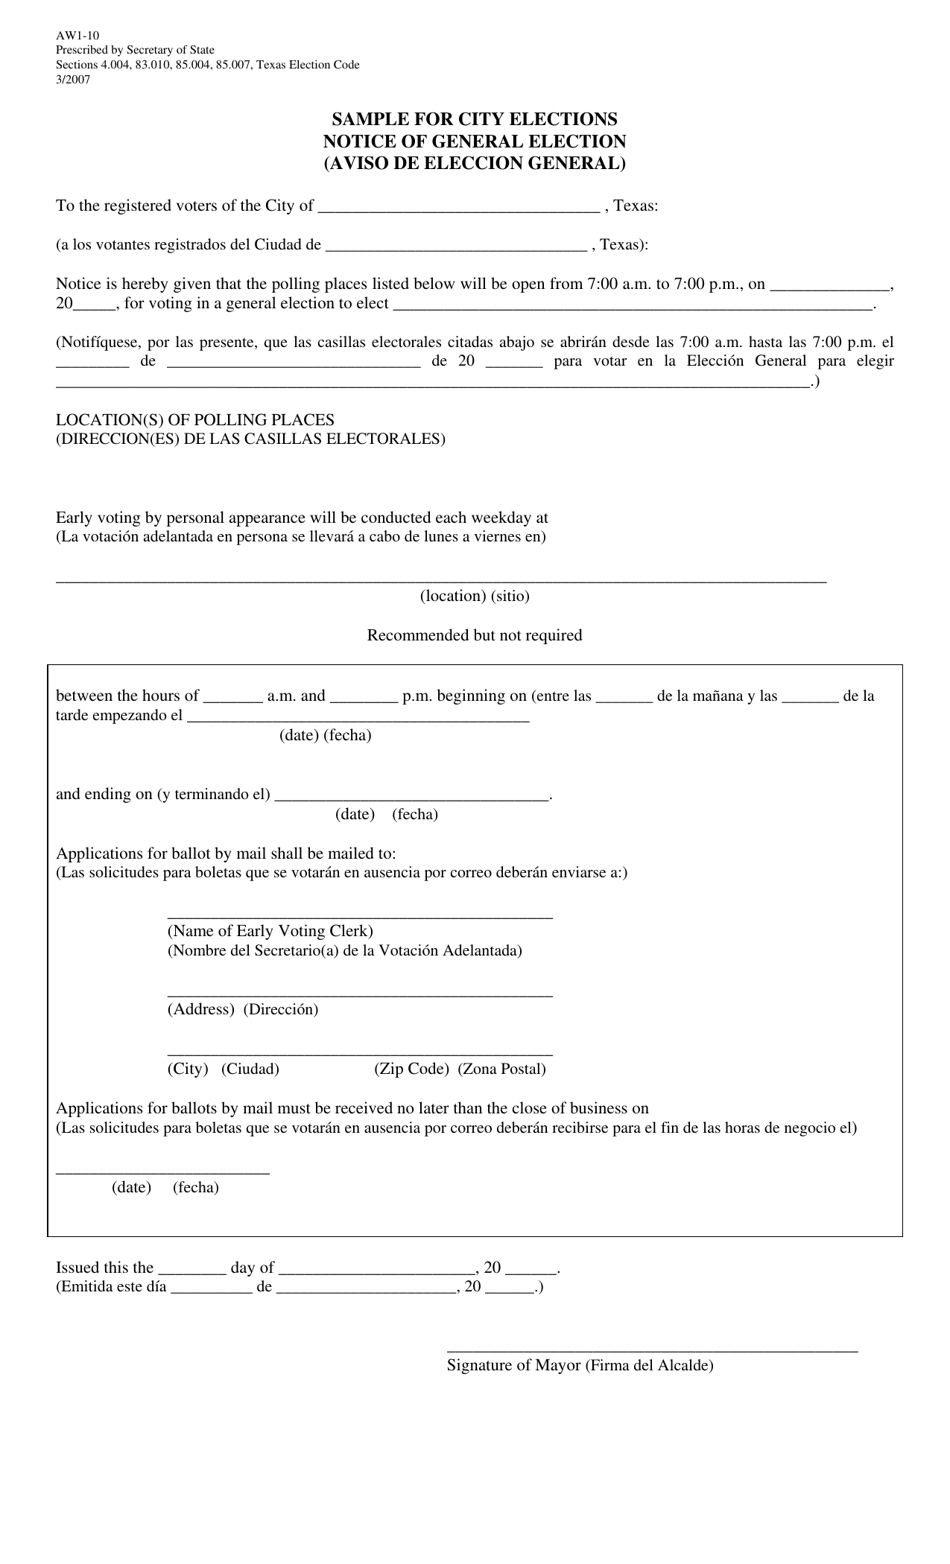 Form AW1-10 Sample for City Elections Notice of General Election - Texas (English / Spanish), Page 1